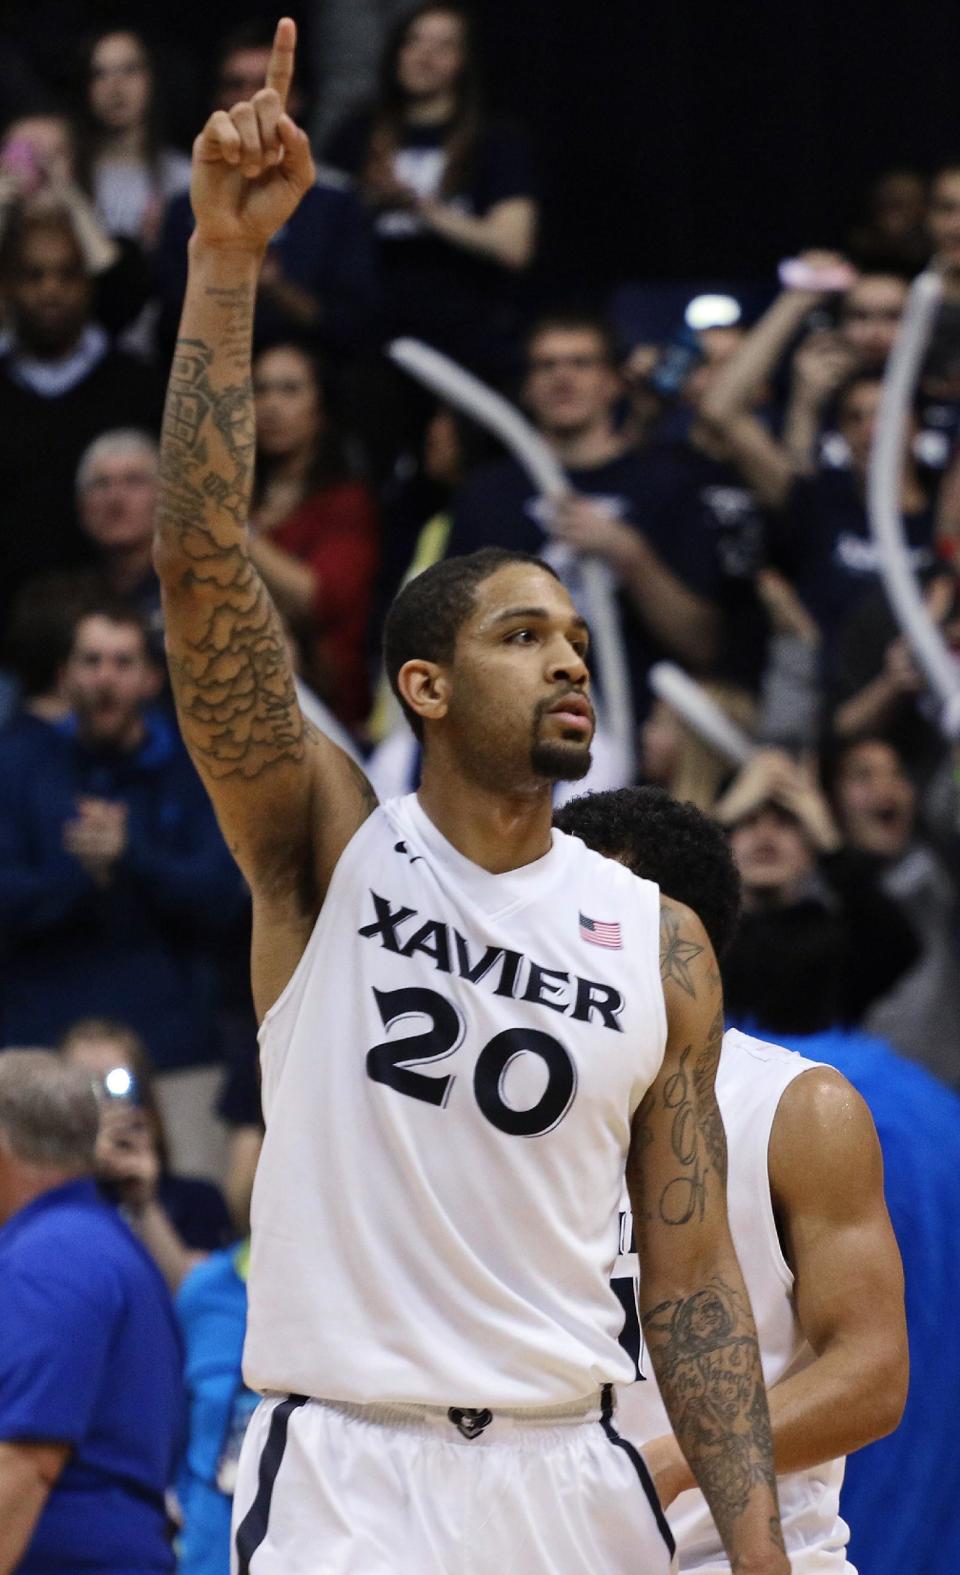 Xavier's Justin Martin reacts at the end of Xavier's 75-69 win over Creighton in an NCAA college basketball game in Cincinnati on Saturday, March 1, 2014. (AP Photo/Tom Uhlman)